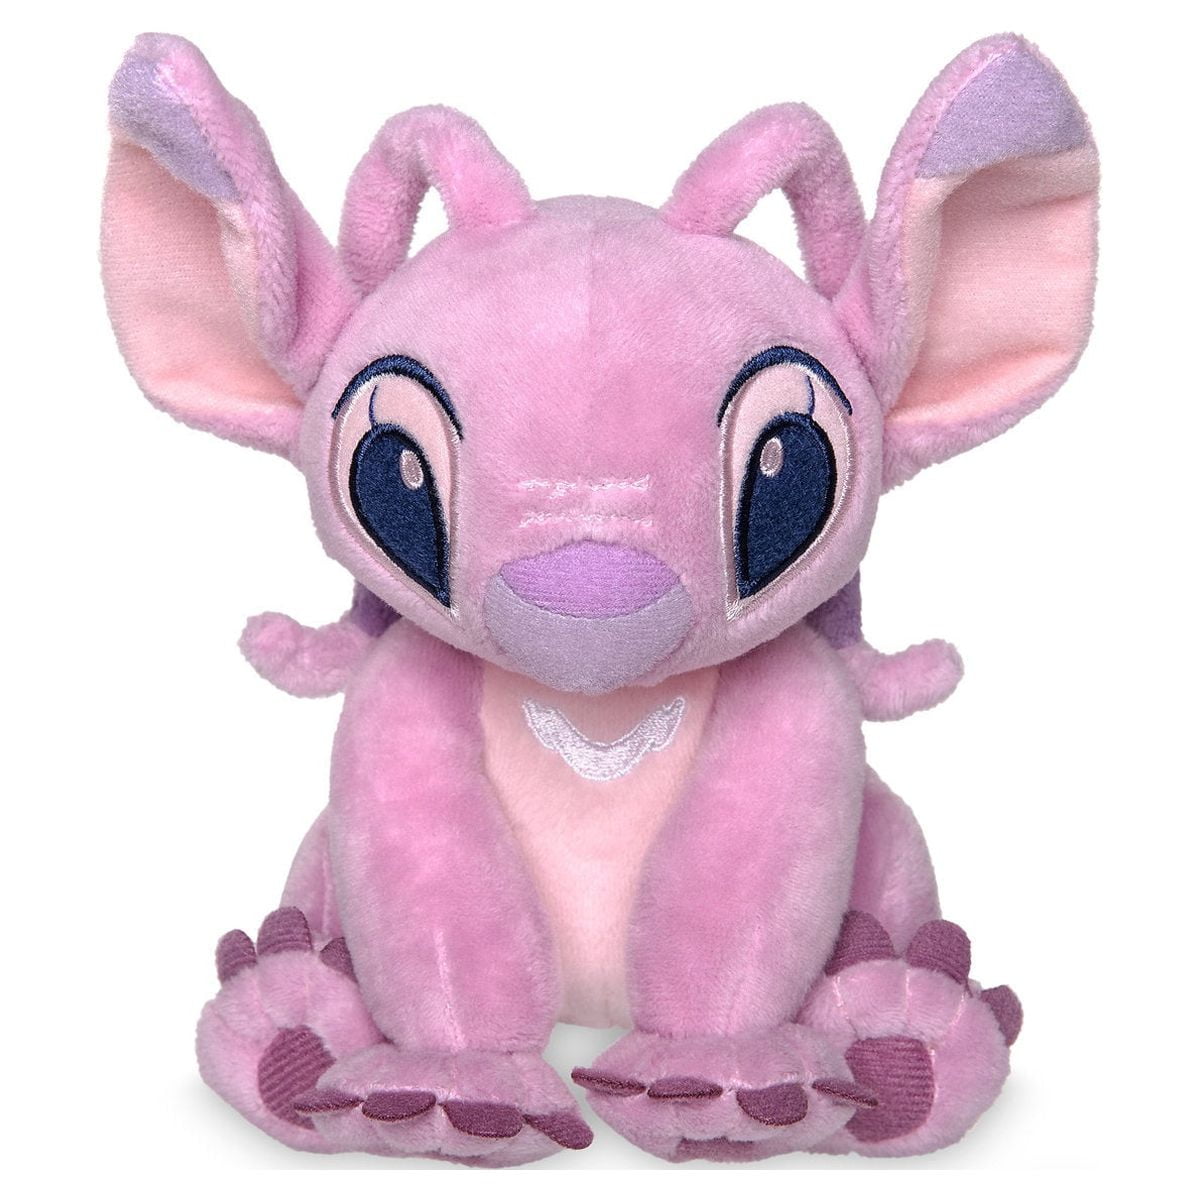 Disney Stitch Plush - 6 inch Mini Bean Bag, Lilo and Stitch, Cuddly Alien  Soft Toy with Big Floppy Ears and Fuzzy Texture, Suitable for All Ages 0+